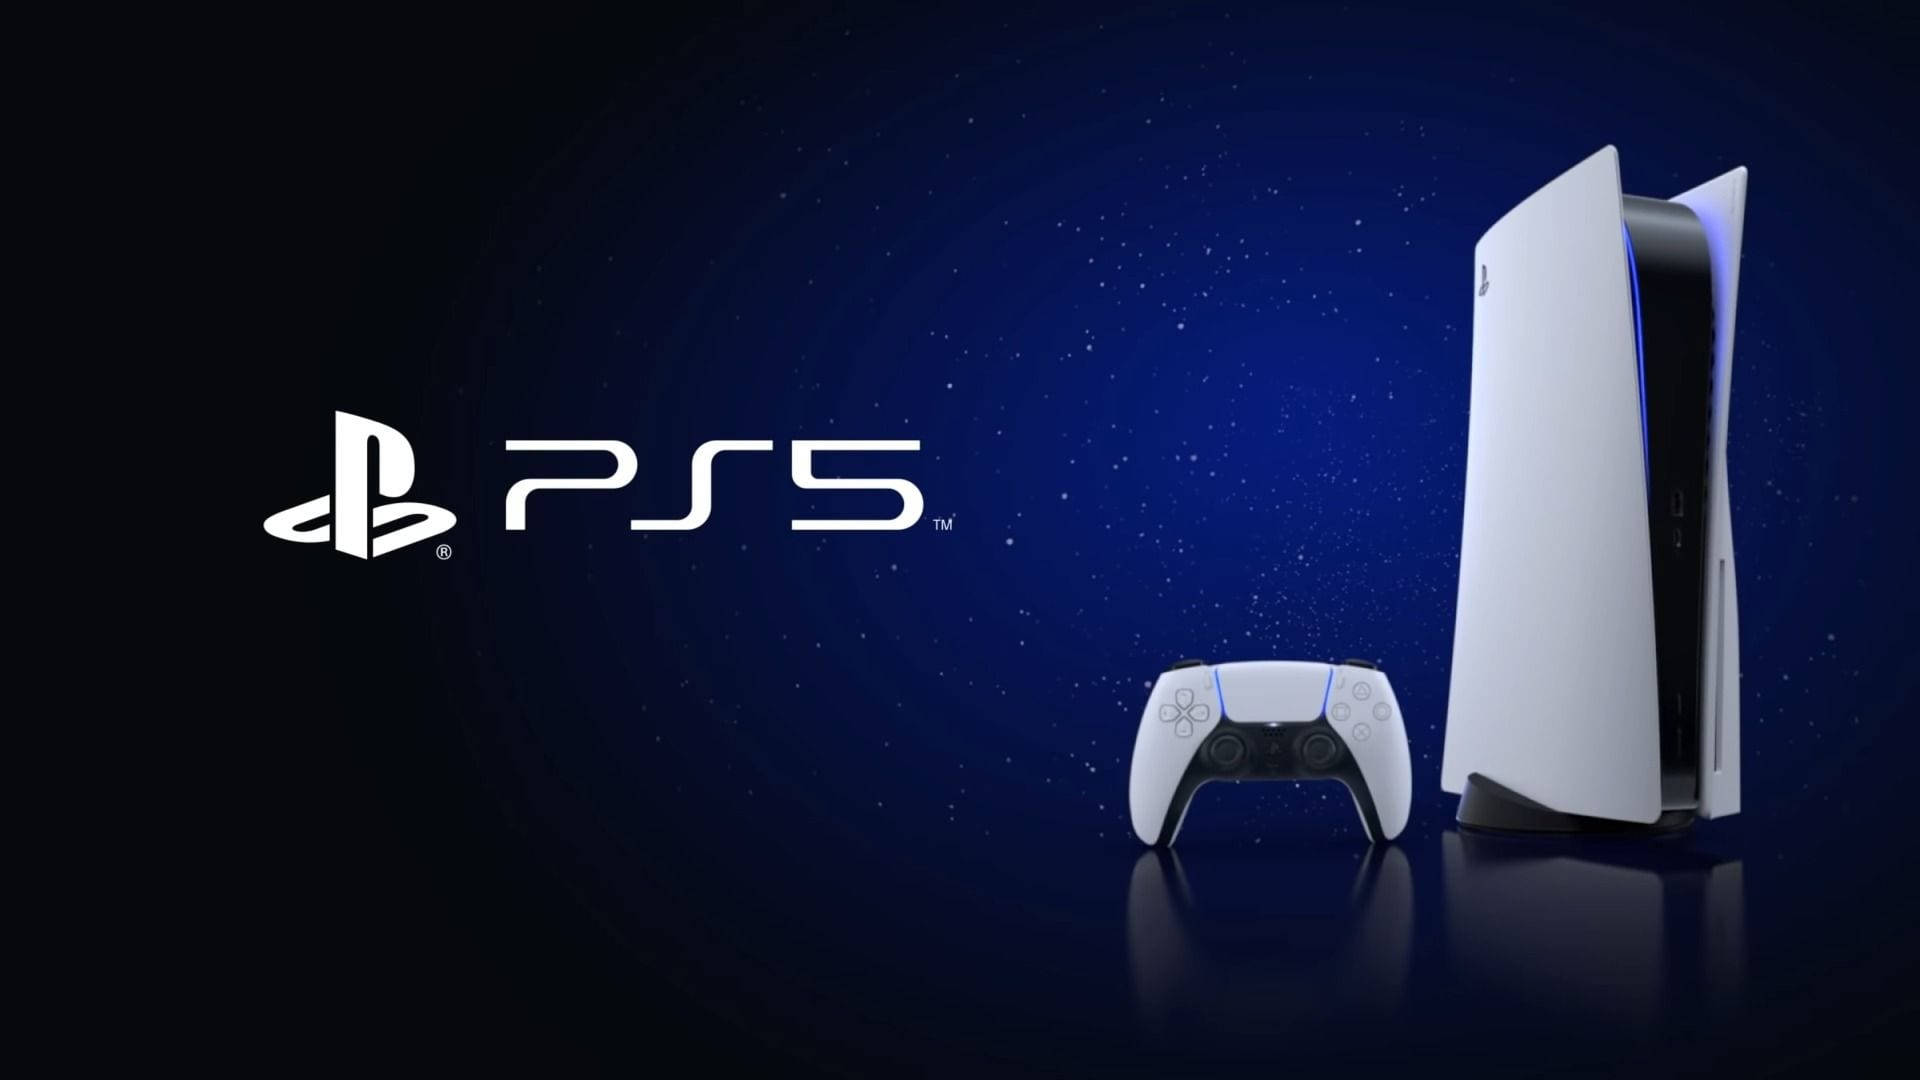 Free Ps5 Wallpaper Downloads, Ps5 Wallpaper for FREE